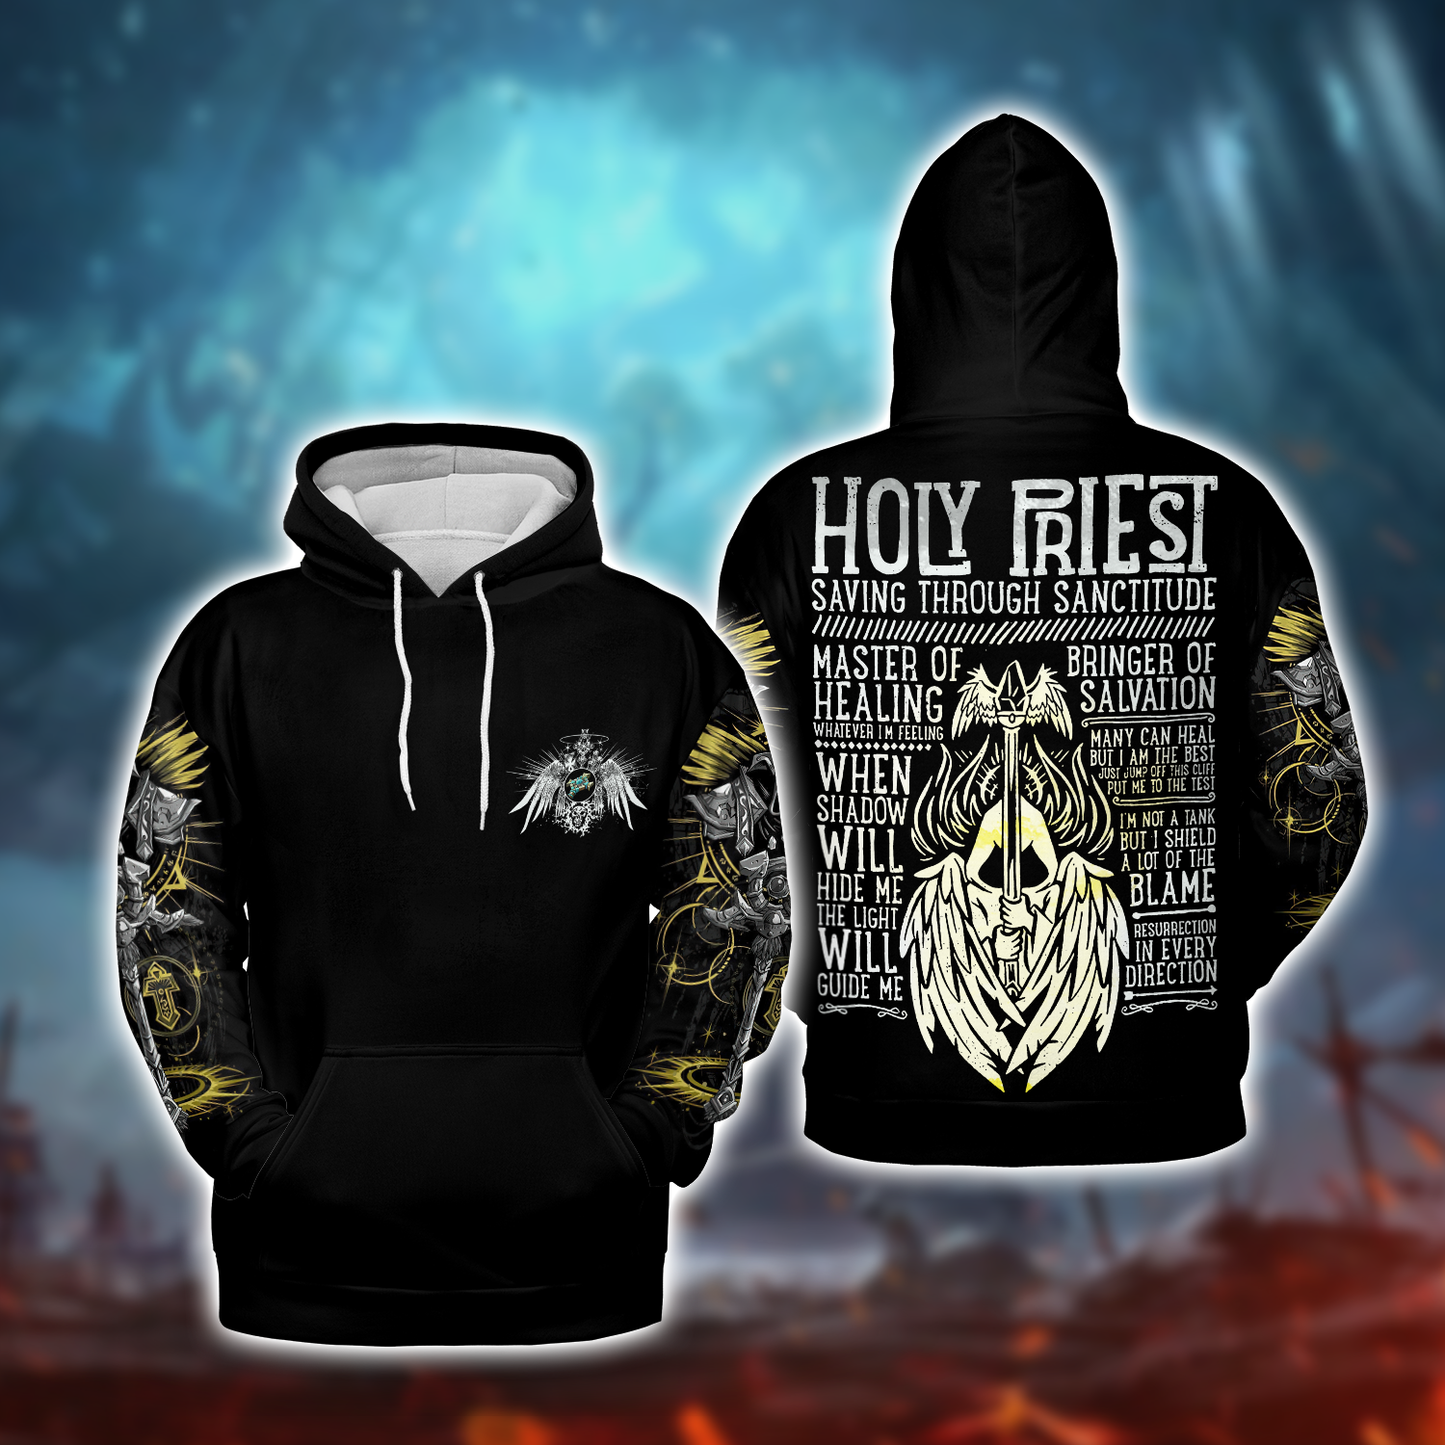 Holy Priest WoW Class Guide V1 AOP Hoodie